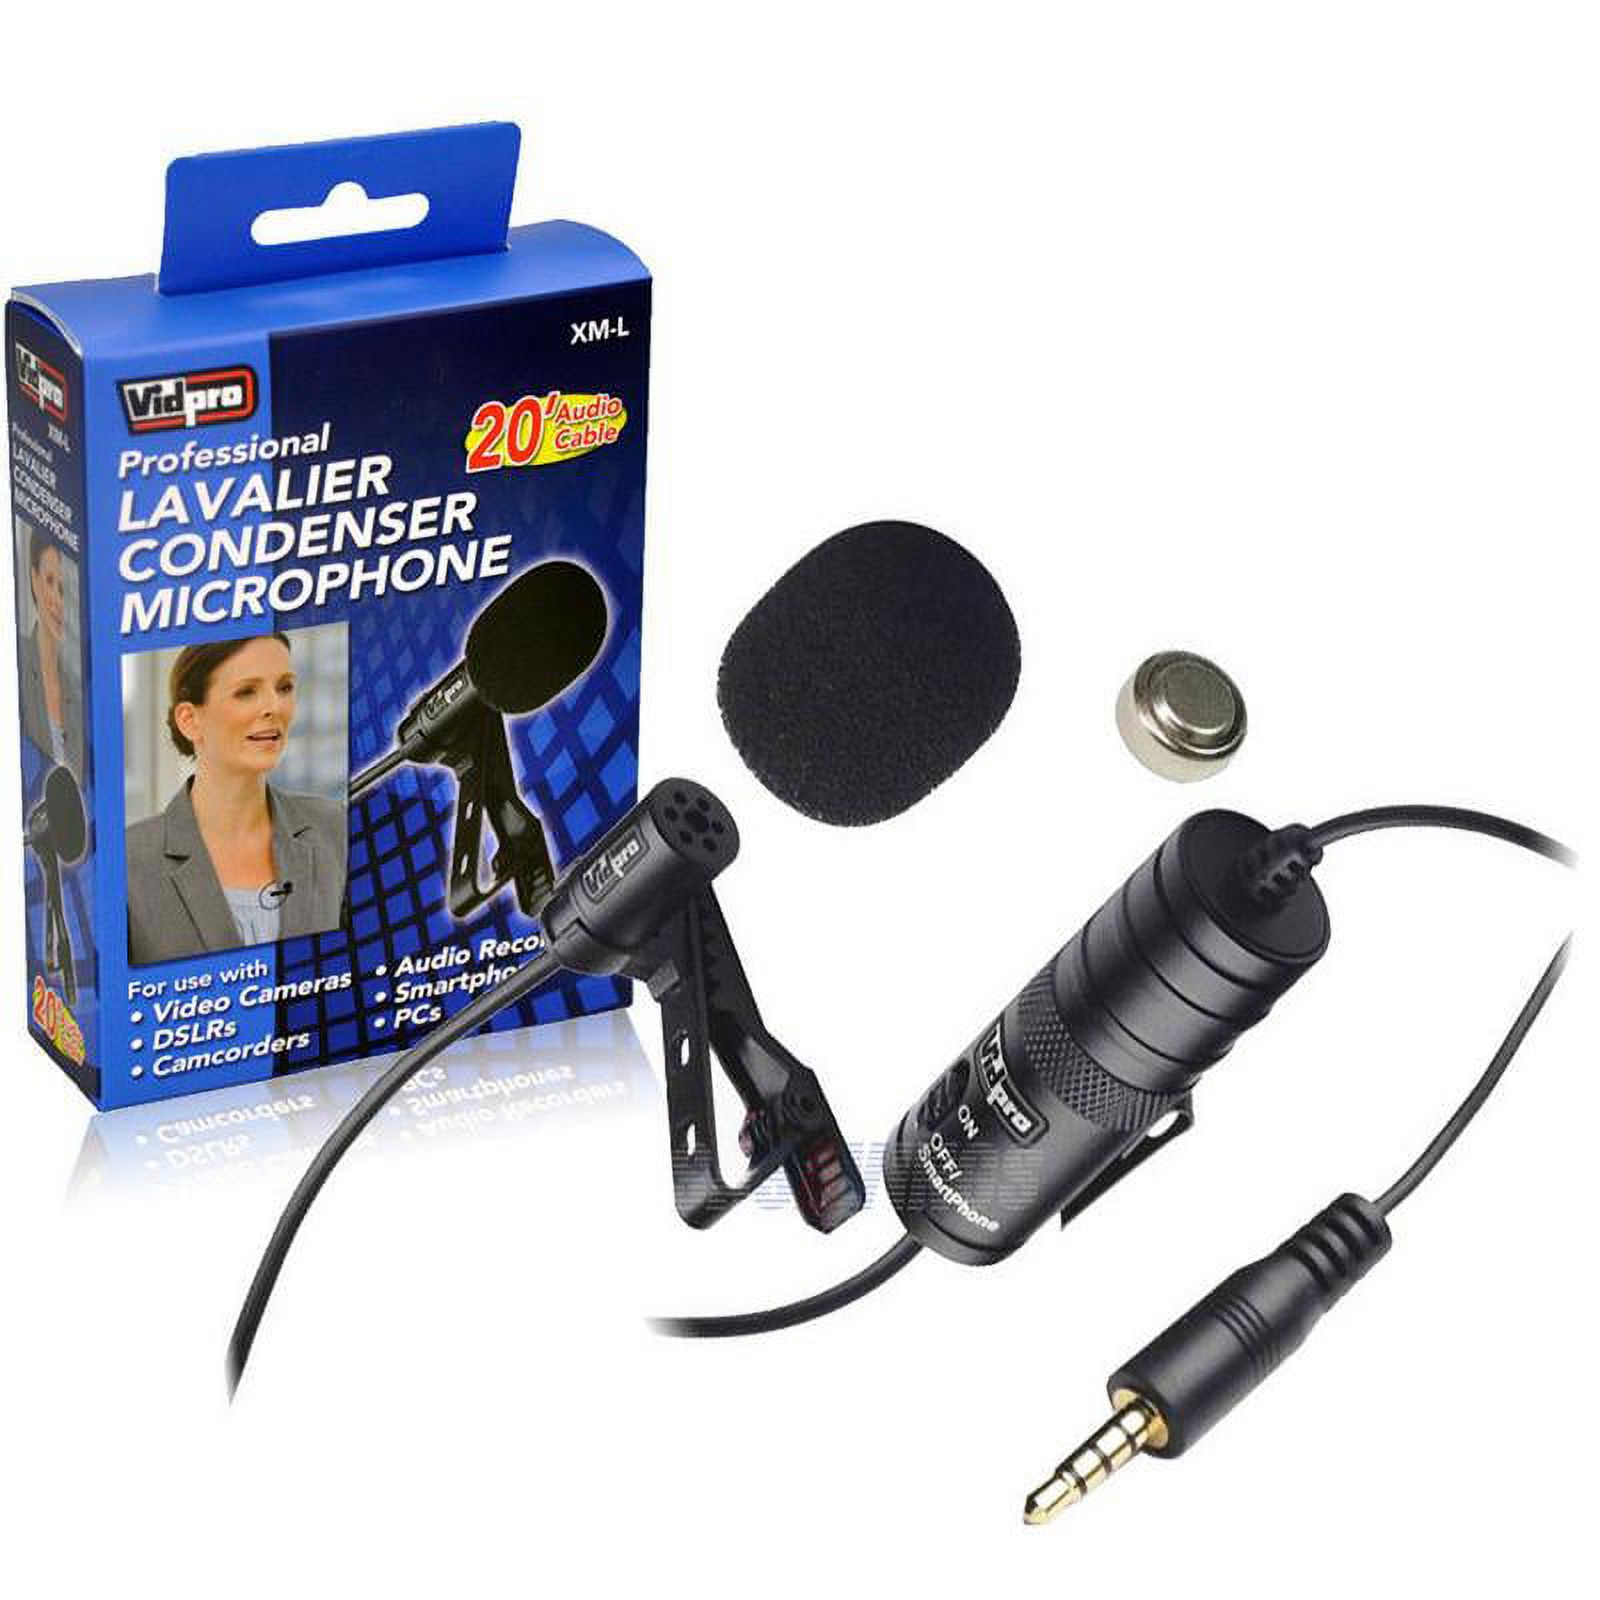 Panasonic Lumix DMC-GH5 Digital Camera External Microphone Vidpro XM-L Wired Lavalier microphone - 20' Audio Cable - Transducer type: Electret Condenser - image 1 of 2